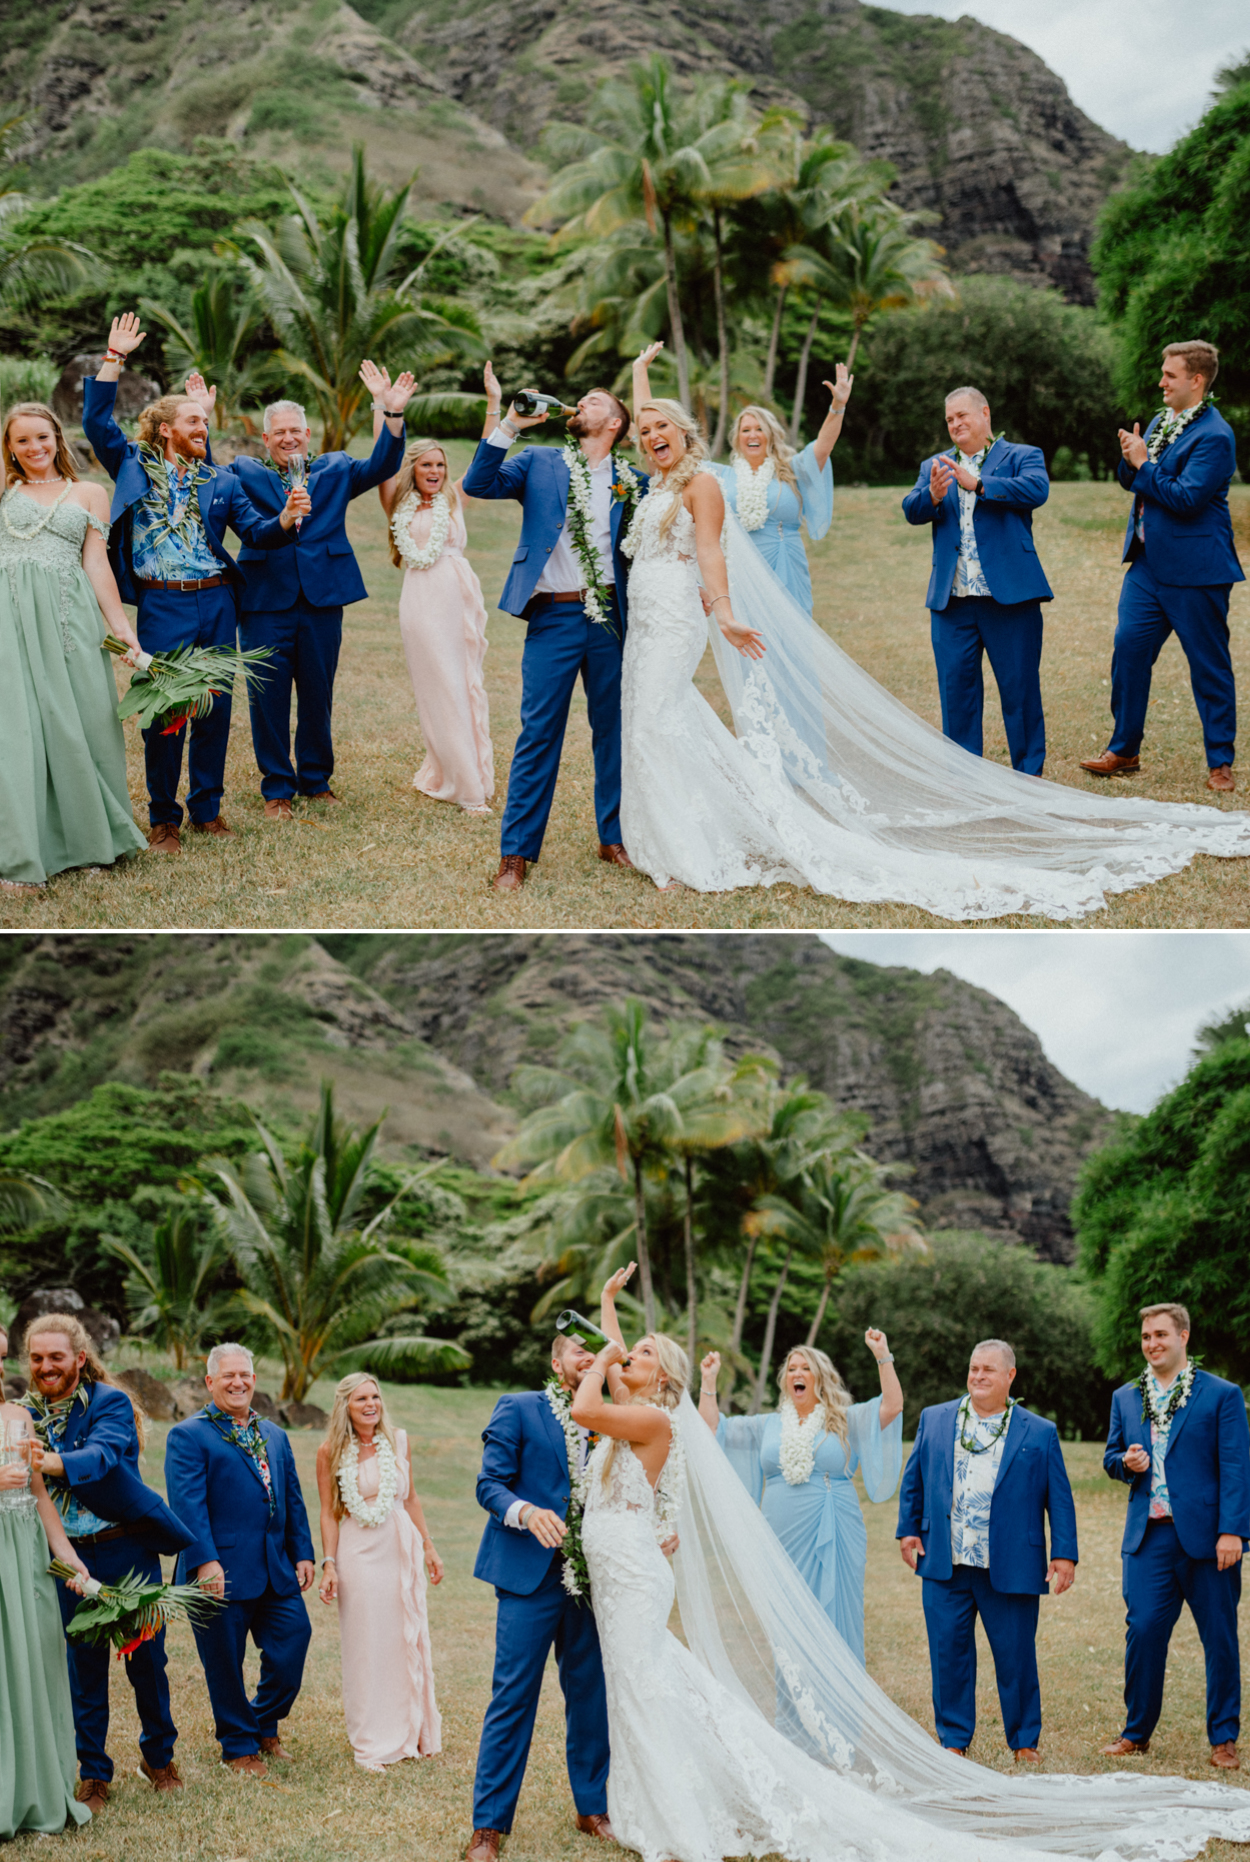 Bride and Grooms drinking champagne with guests in Paliku Gardens Kualoa Ranch wedding with Koʻolau Range backdrop